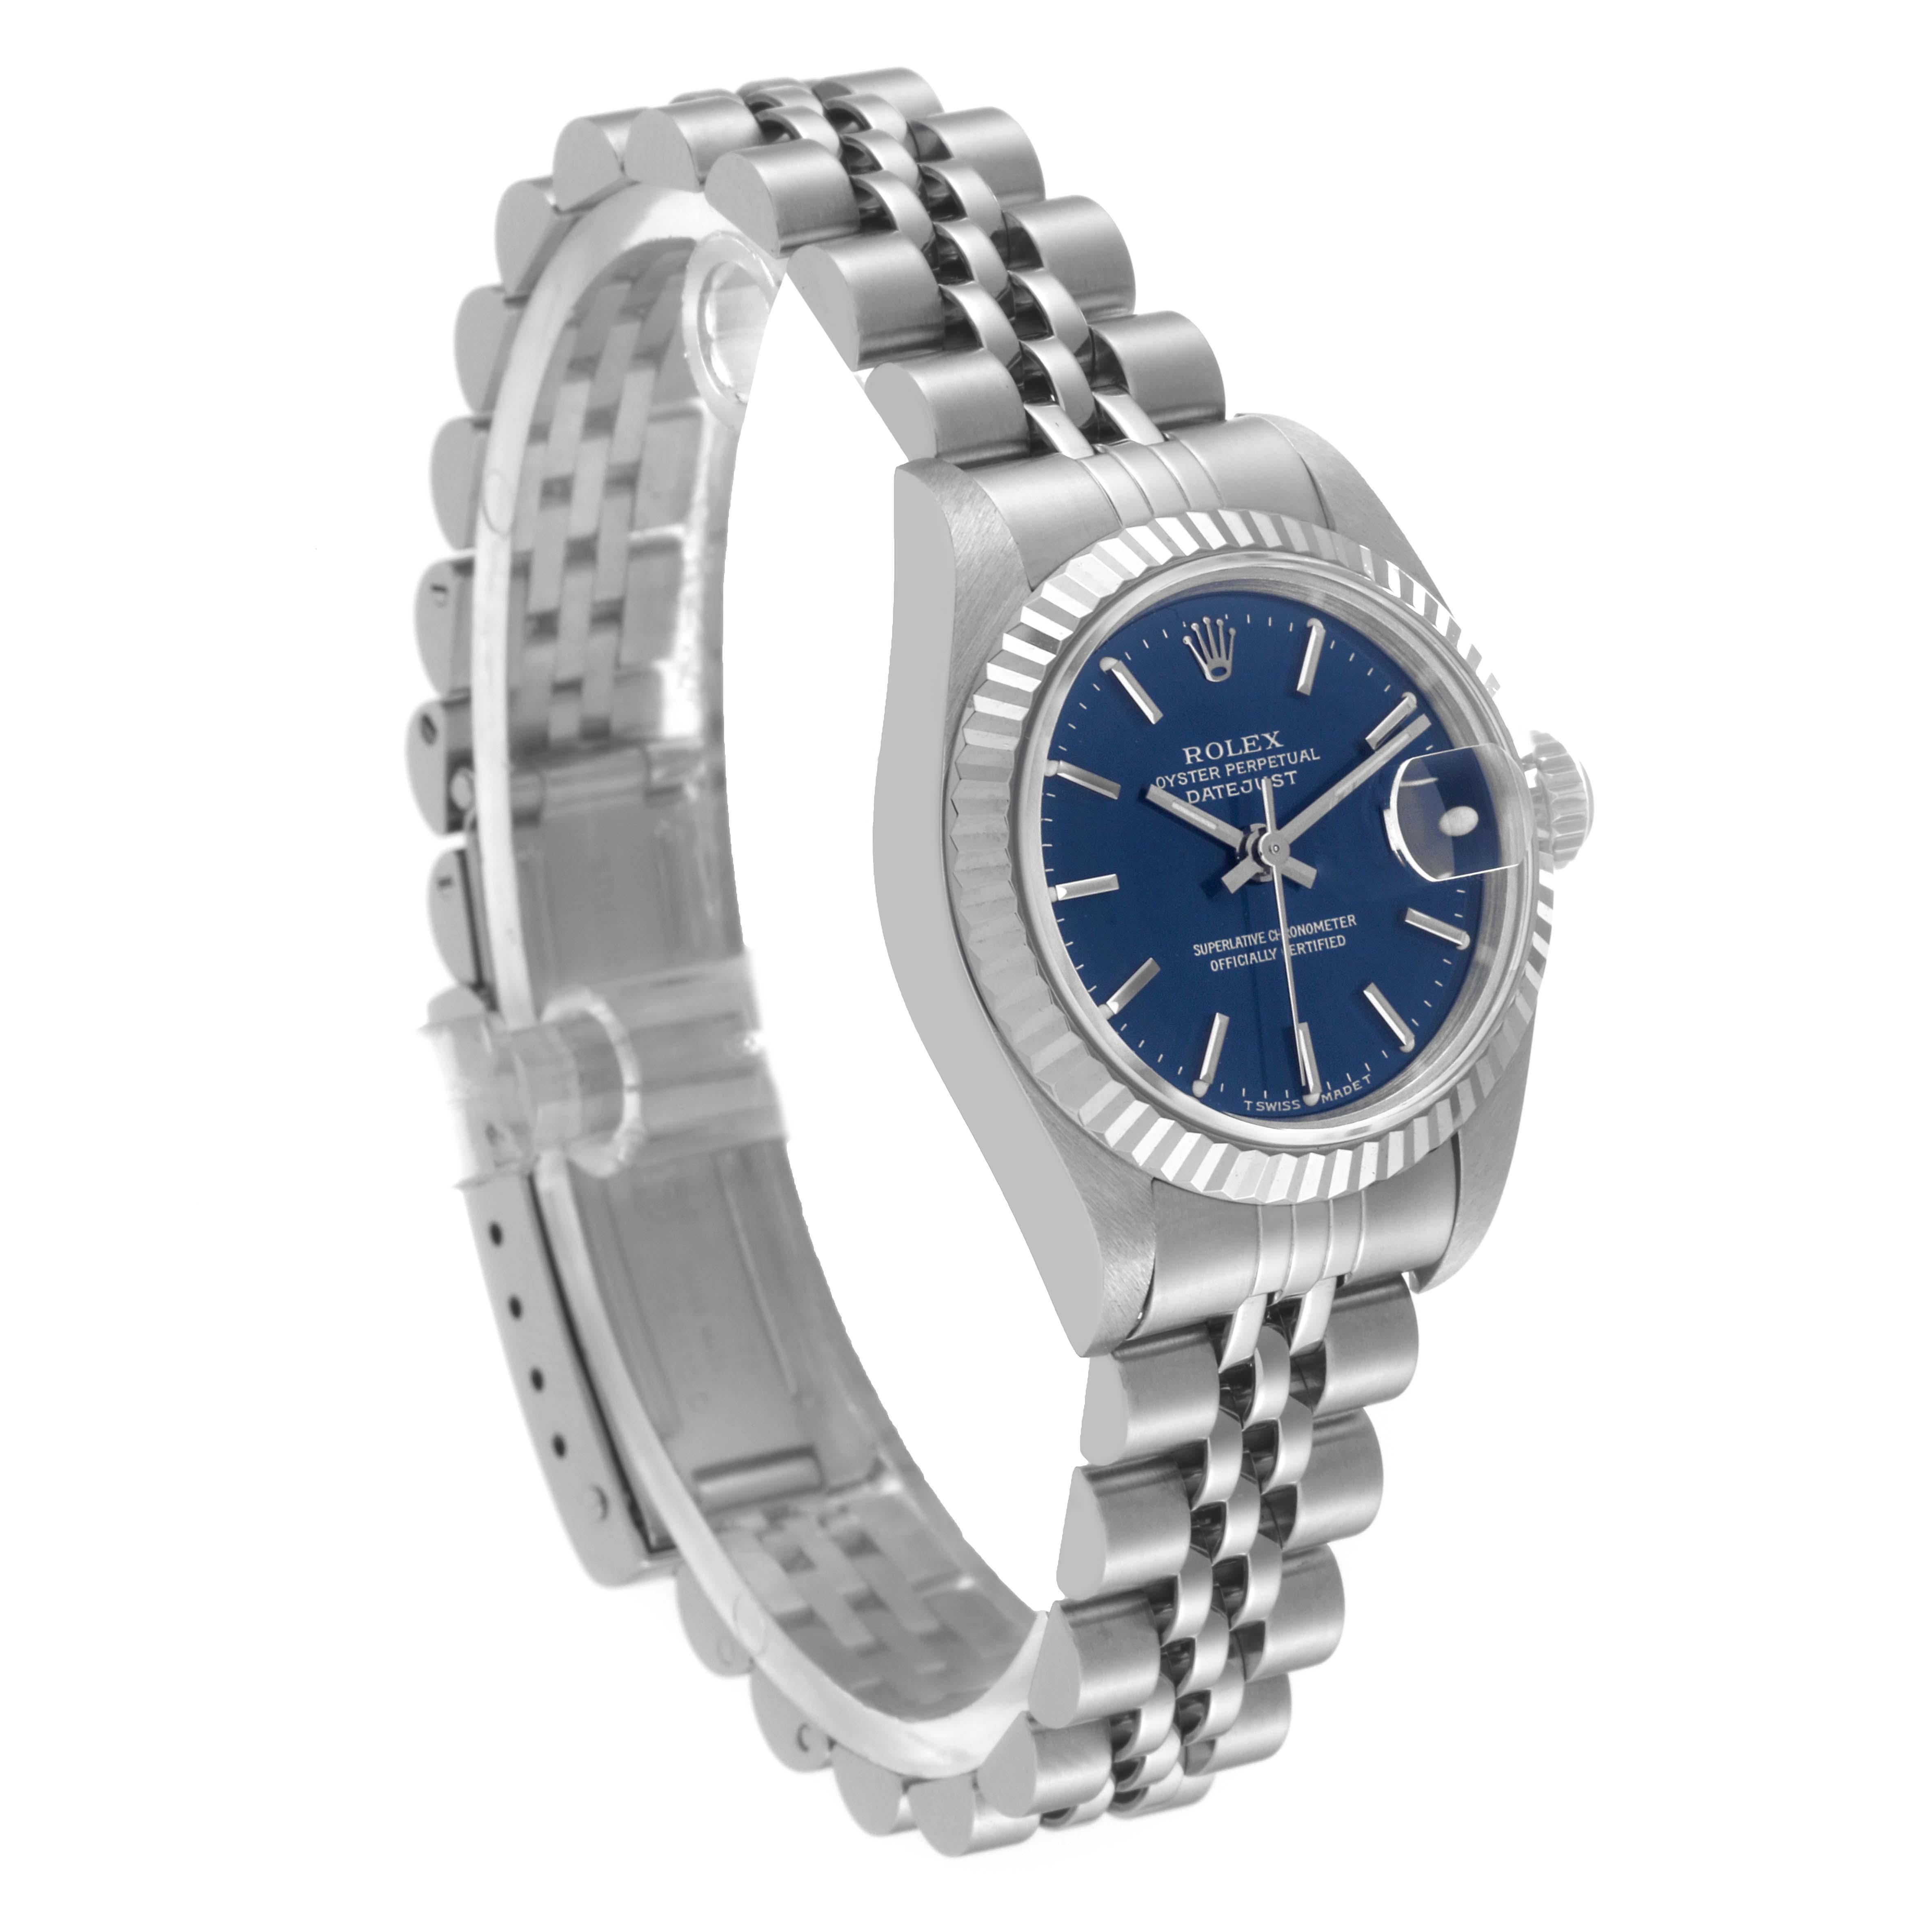 Rolex Datejust Steel White Gold Blue Dial Ladies Watch 69174 In Excellent Condition For Sale In Atlanta, GA